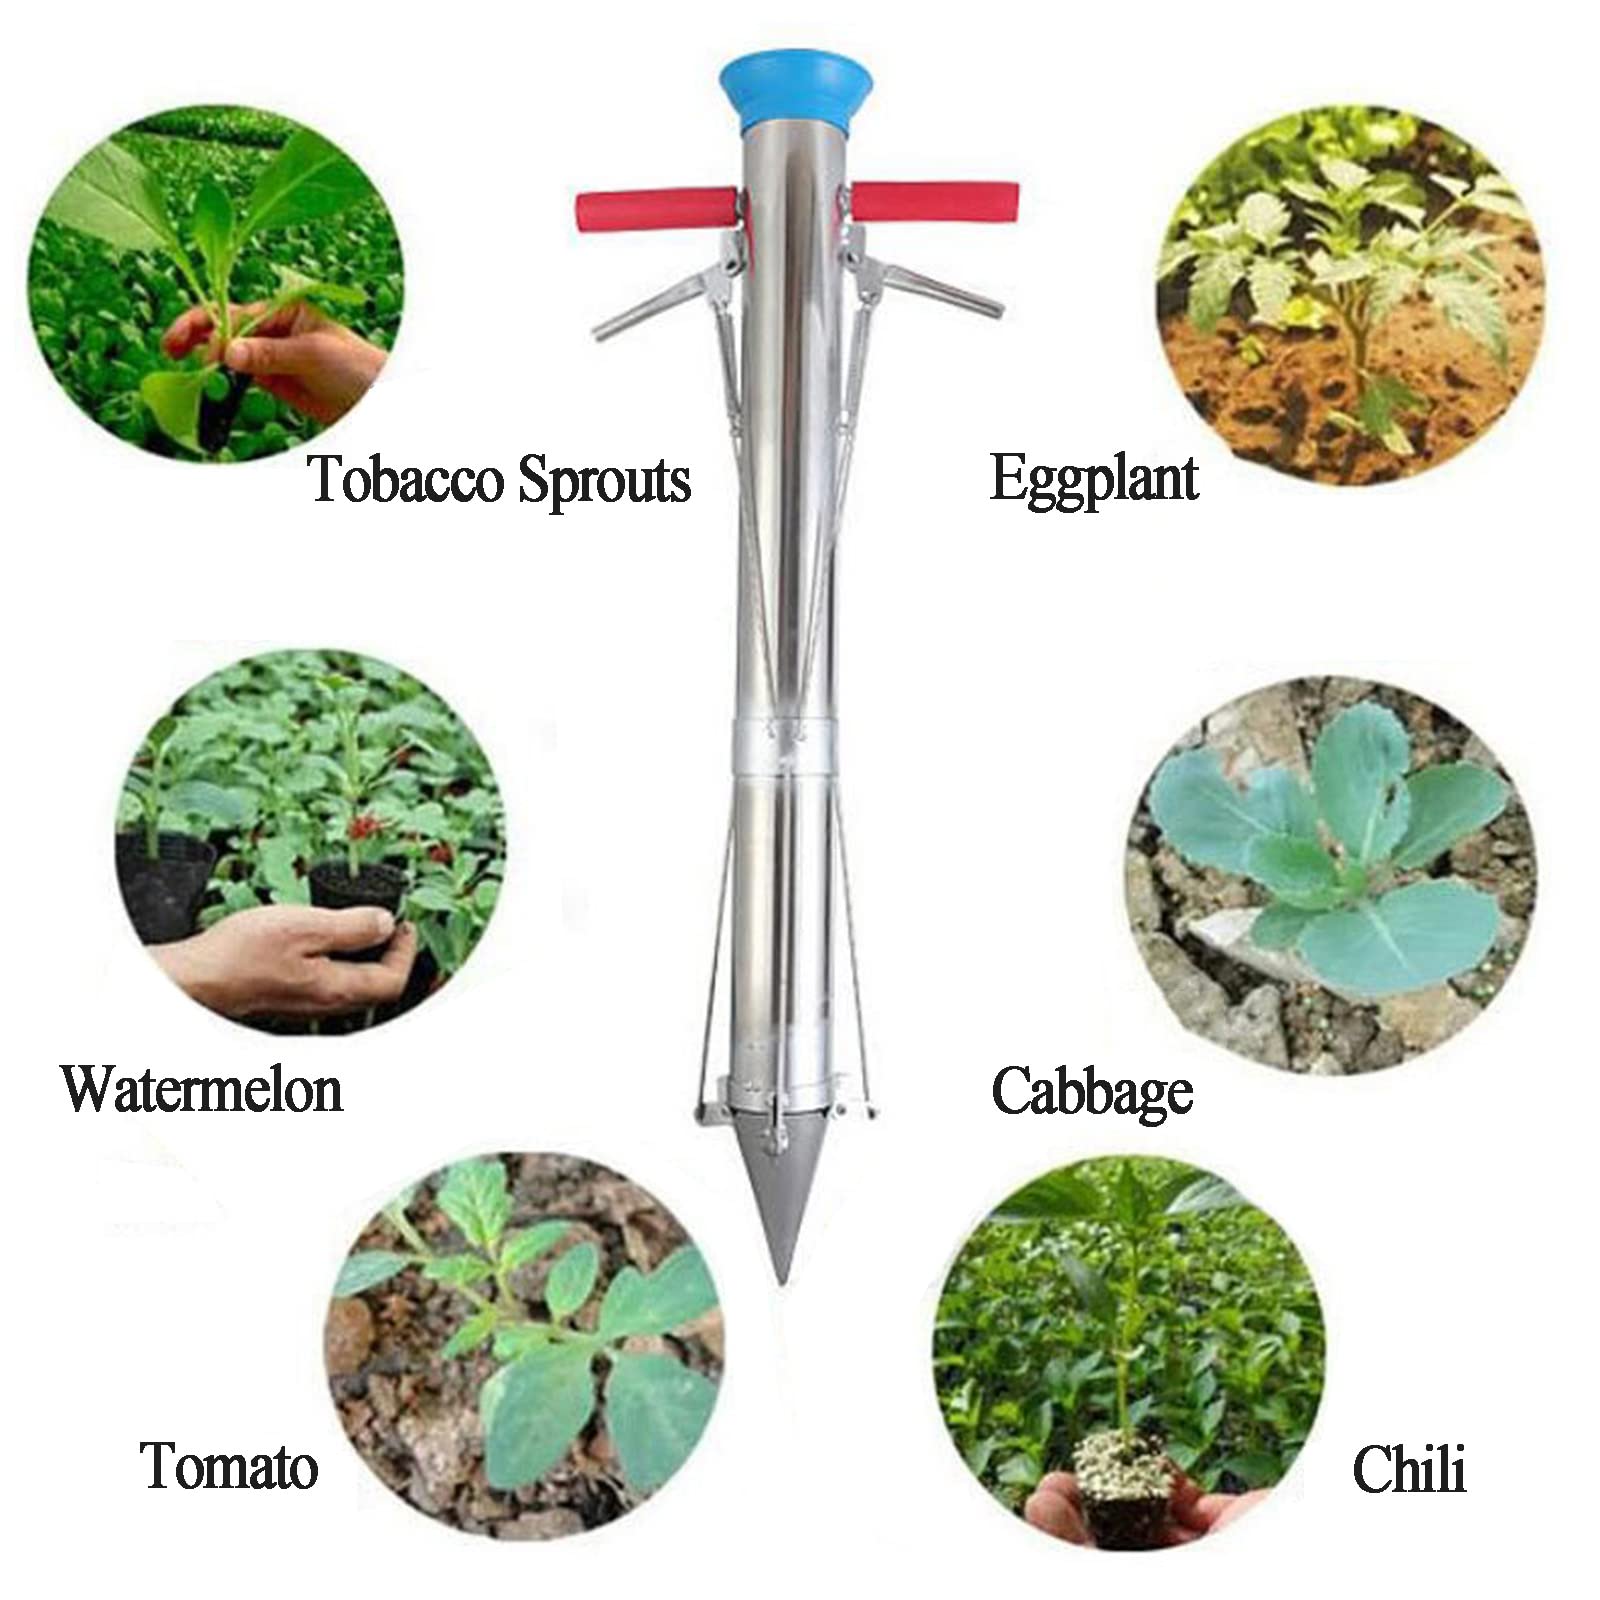 Huskydg Long Handled Bulb Planter Tools, Multi-Functional Vegetable Seedling Tool Stainless Steel Manual Plant Transplanter with Pedal Double Handle for Plant Bulb Seeds Vegetable Garden Plants